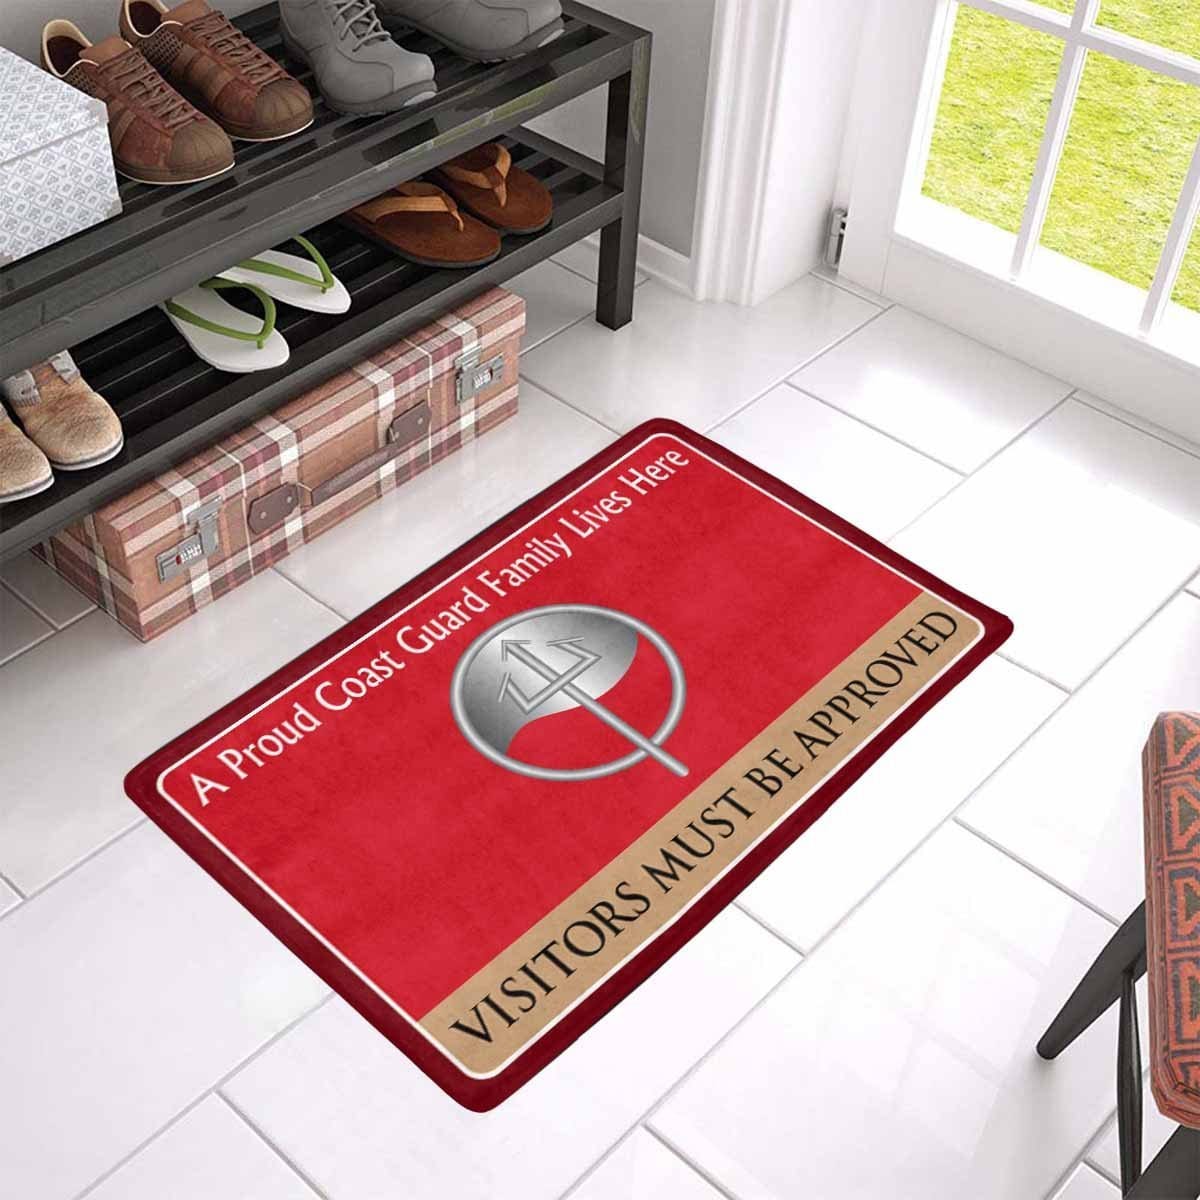 USCG MARINE SCIENCE TECHNICIAN MST Logo Family Doormat - Visitors must be approved (23.6 inches x 15.7 inches)-Doormat-USCG-Rate-Veterans Nation